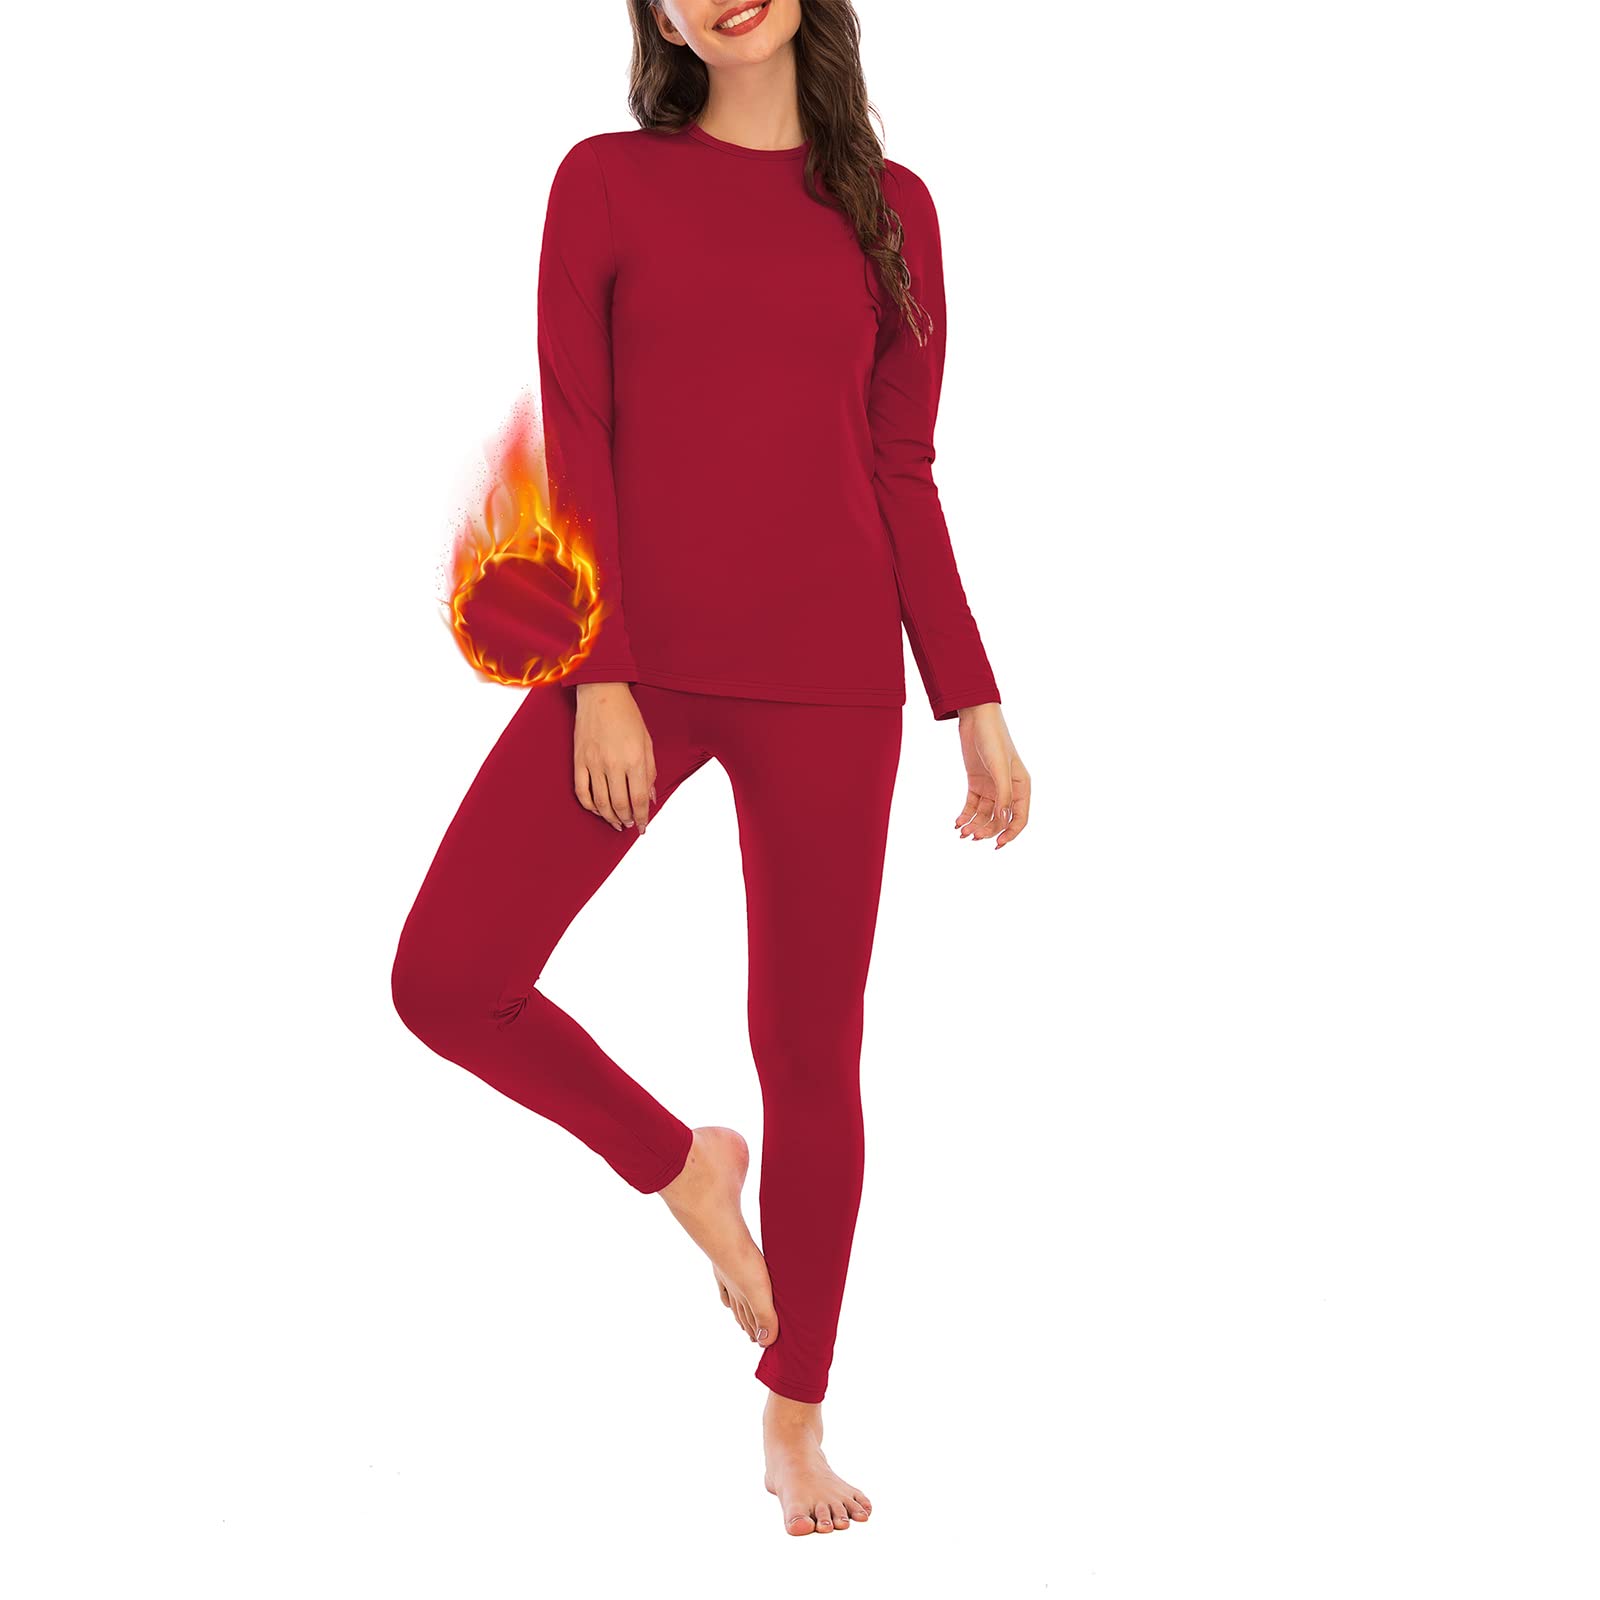 American Trends Womens Thermal Underwear Set Long Johns Base Layer Fleece Lined Top and Bottom Plus Size Thermals Sets Loungewear Red XX-Large